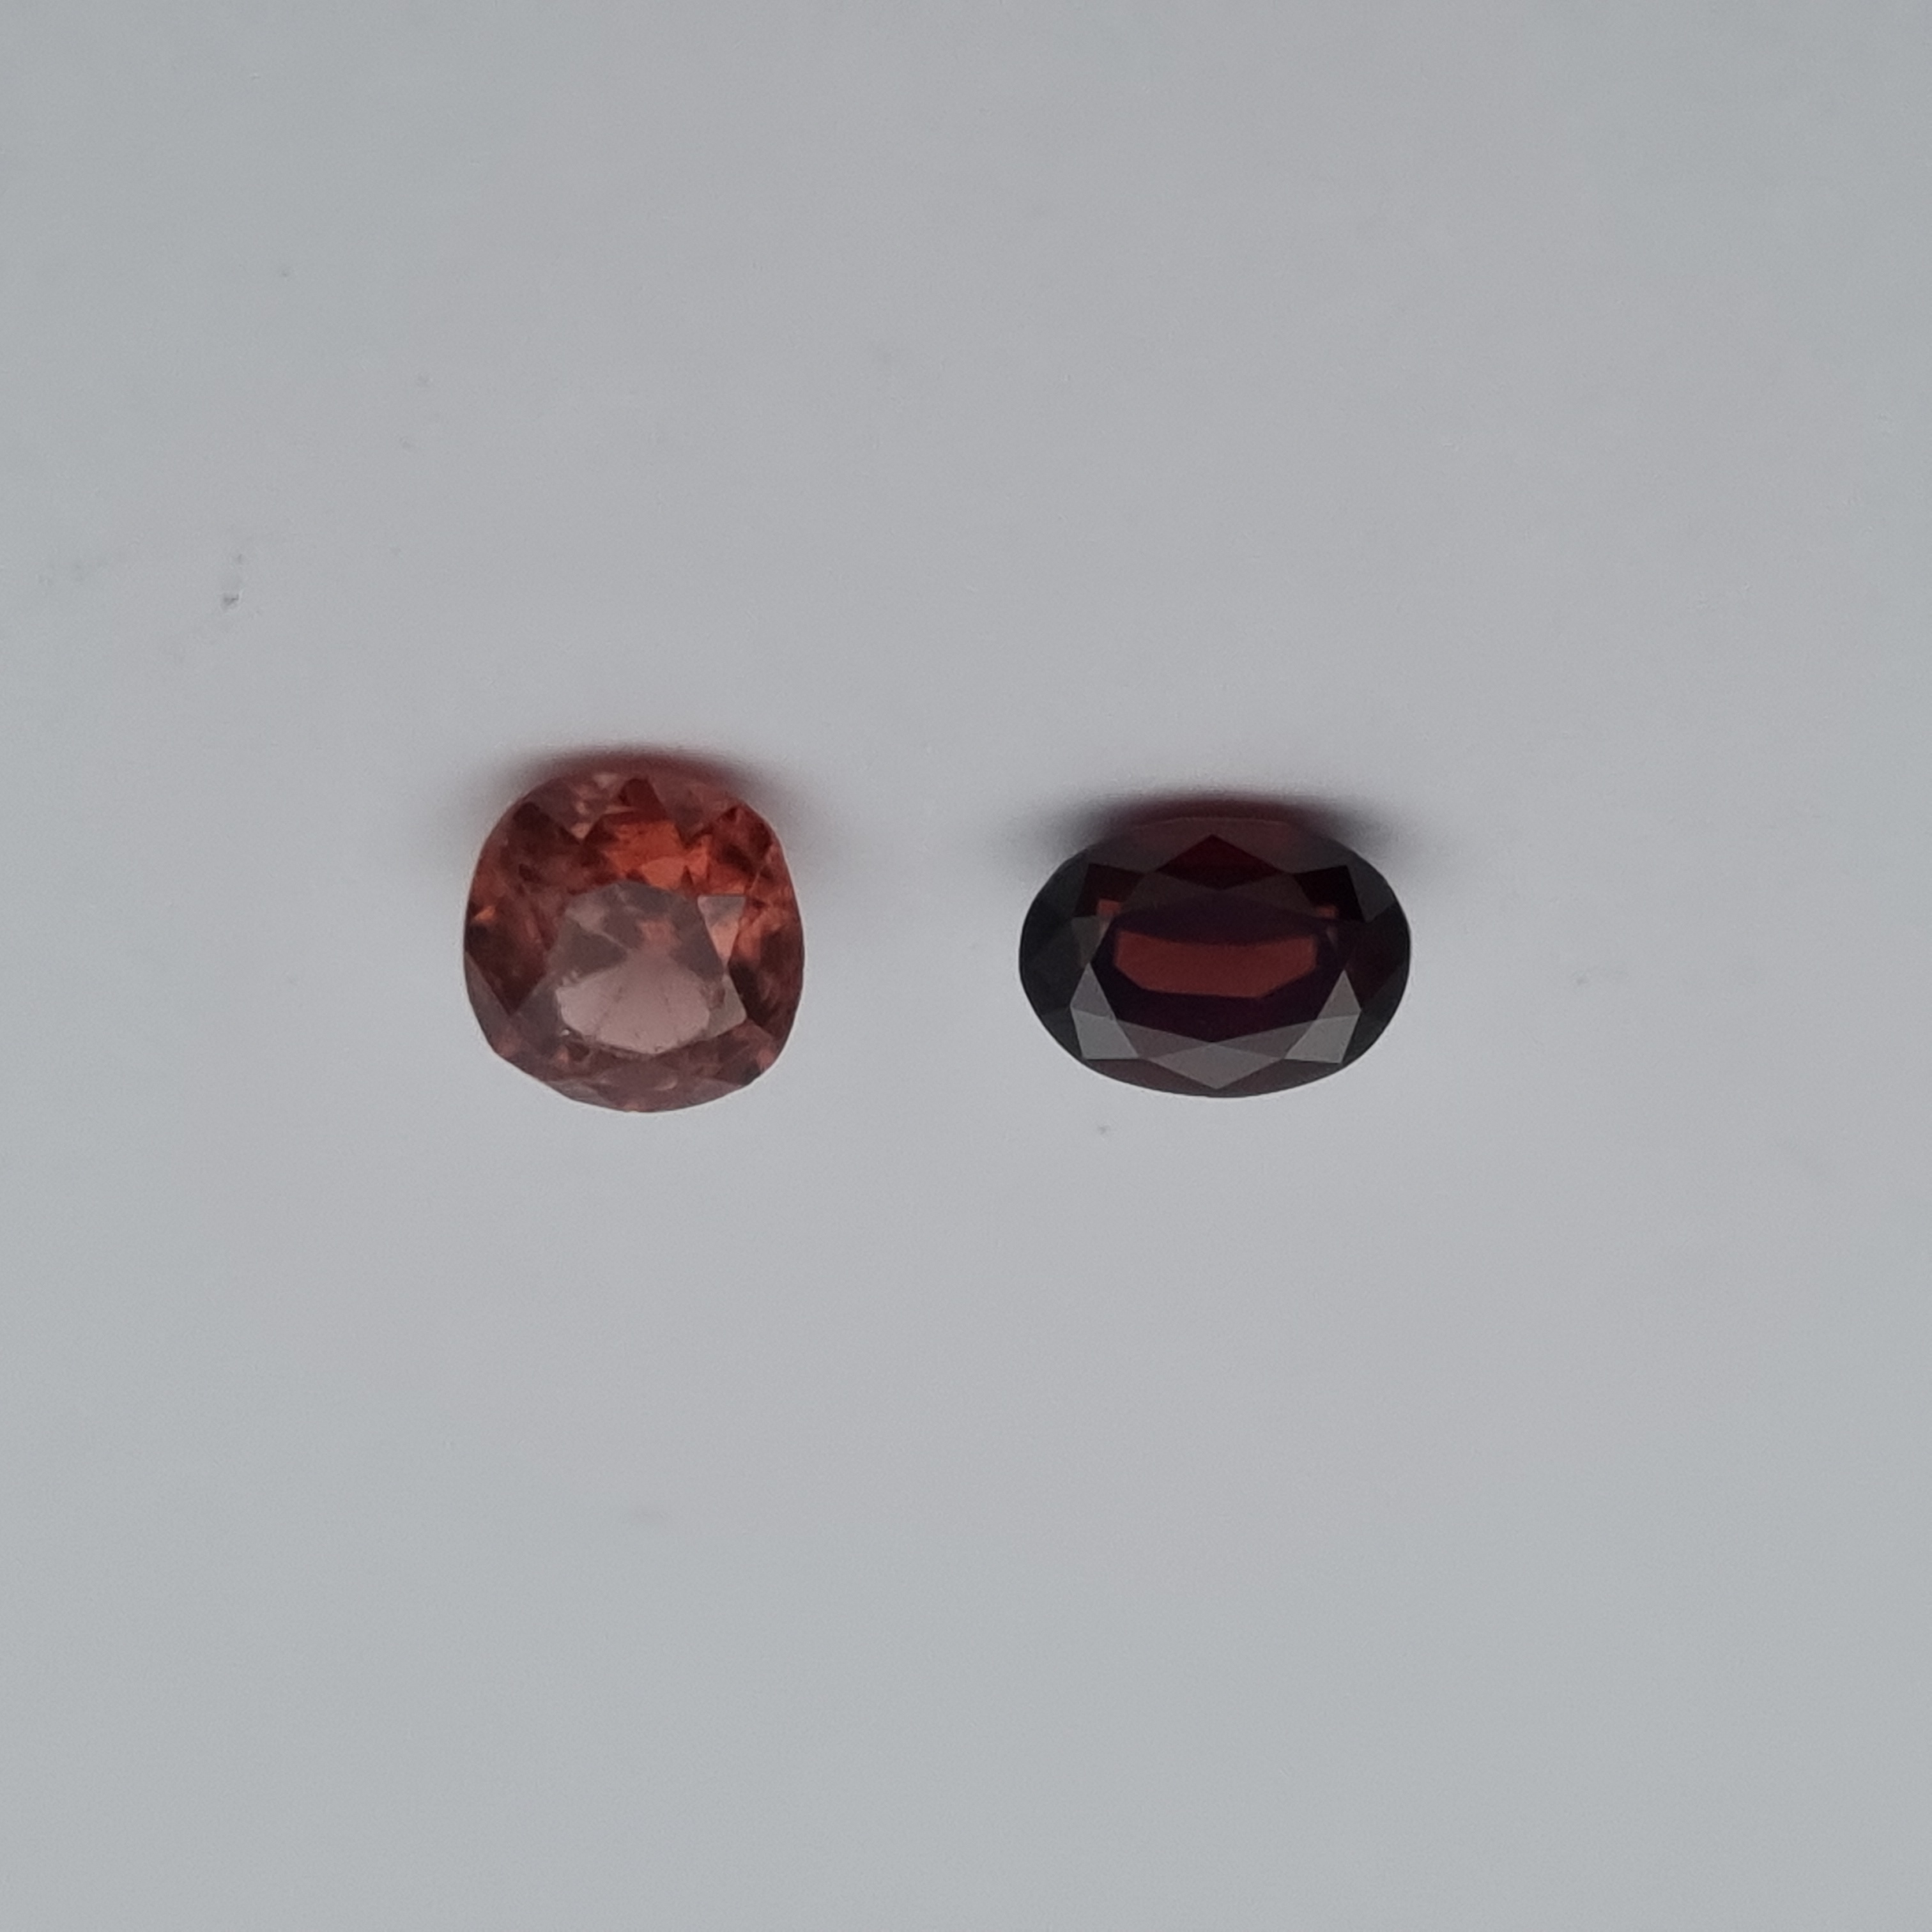 zircons close to being red in colour